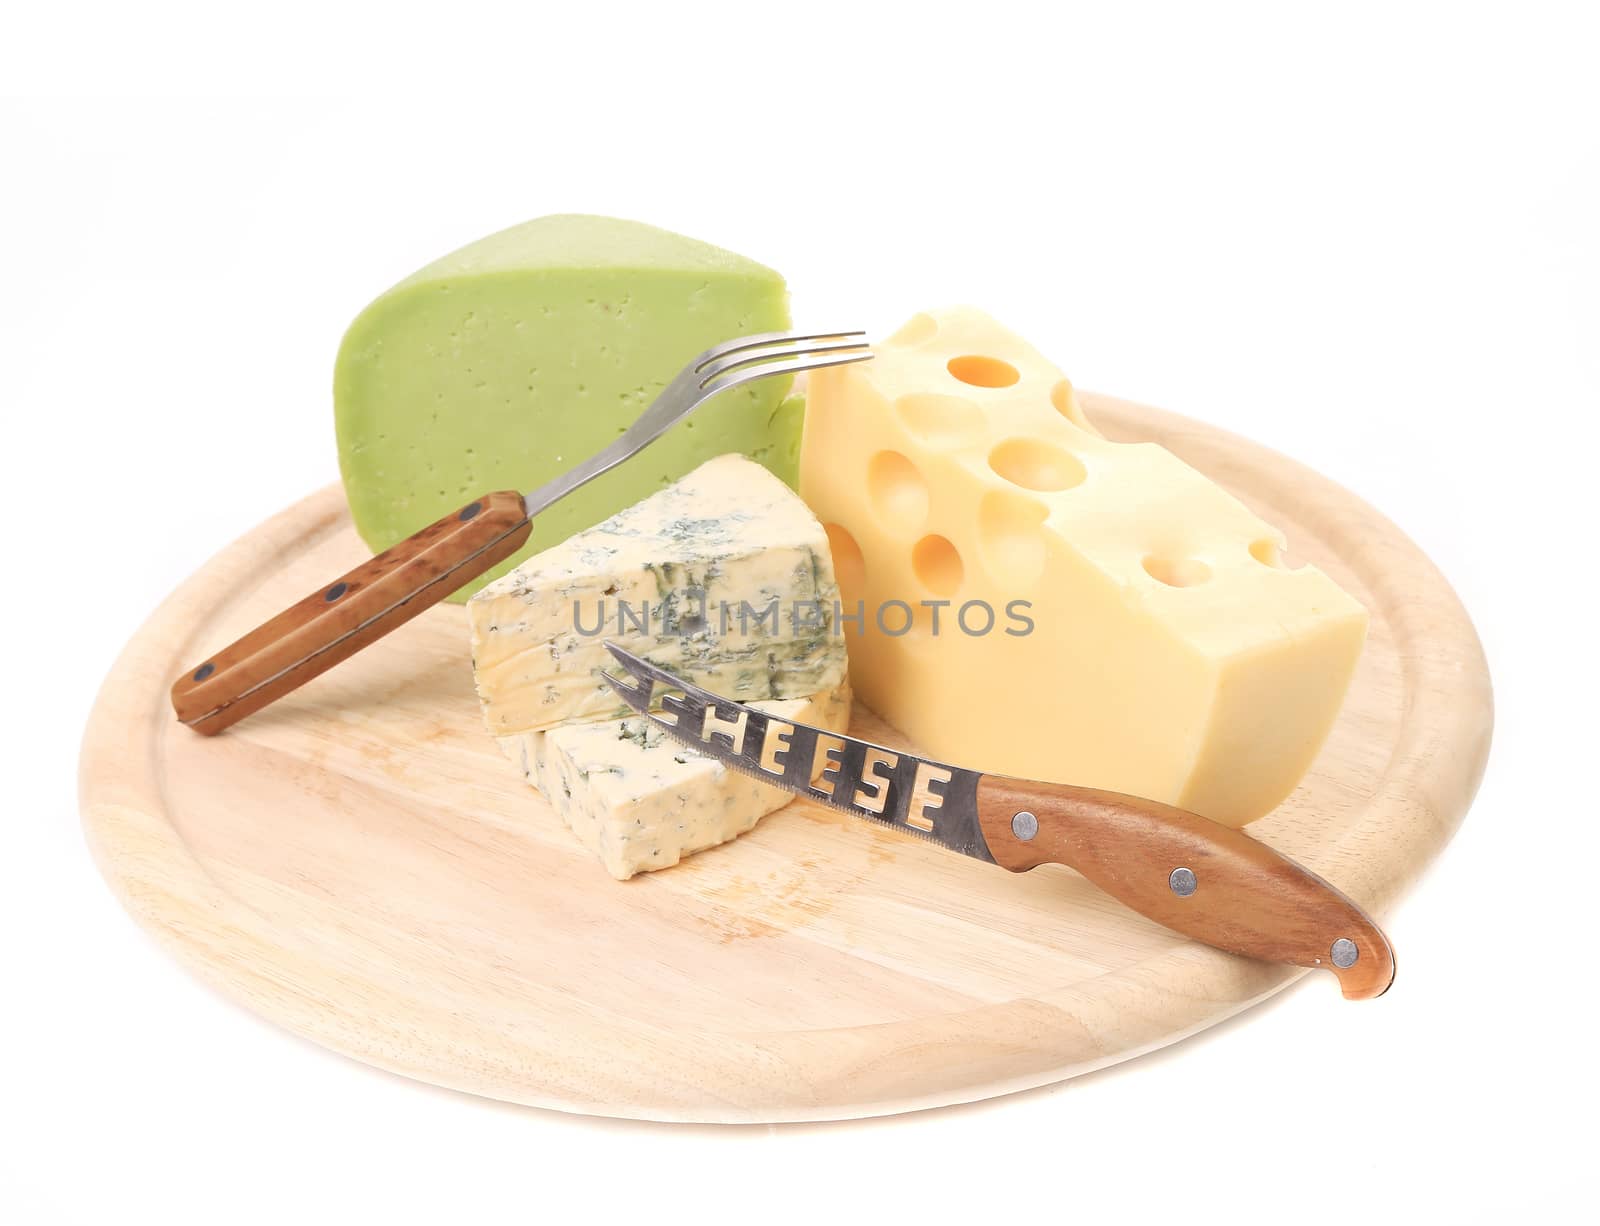 Various types of cheeses on wood. Isolated on a white background.